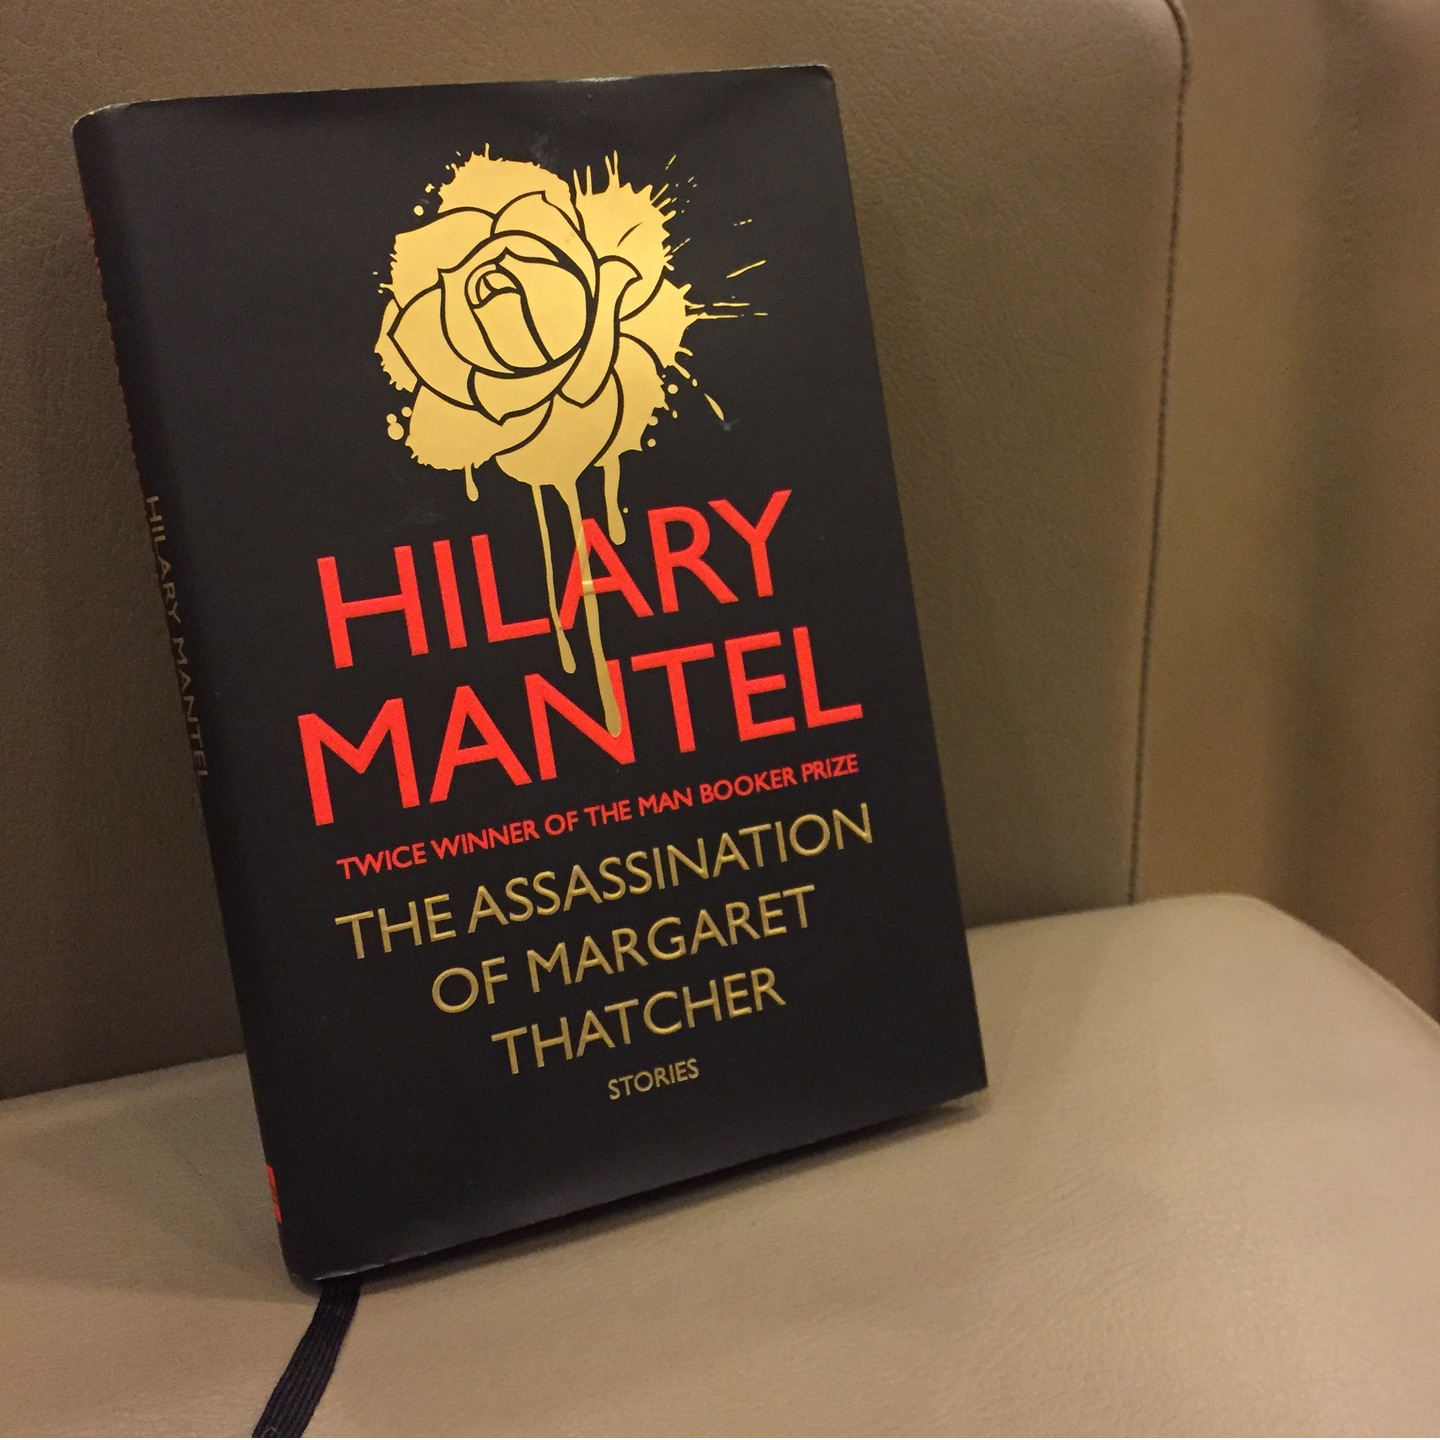 The Assassination of Margaret Thatcher by Hilary Mantel [Hardcover]